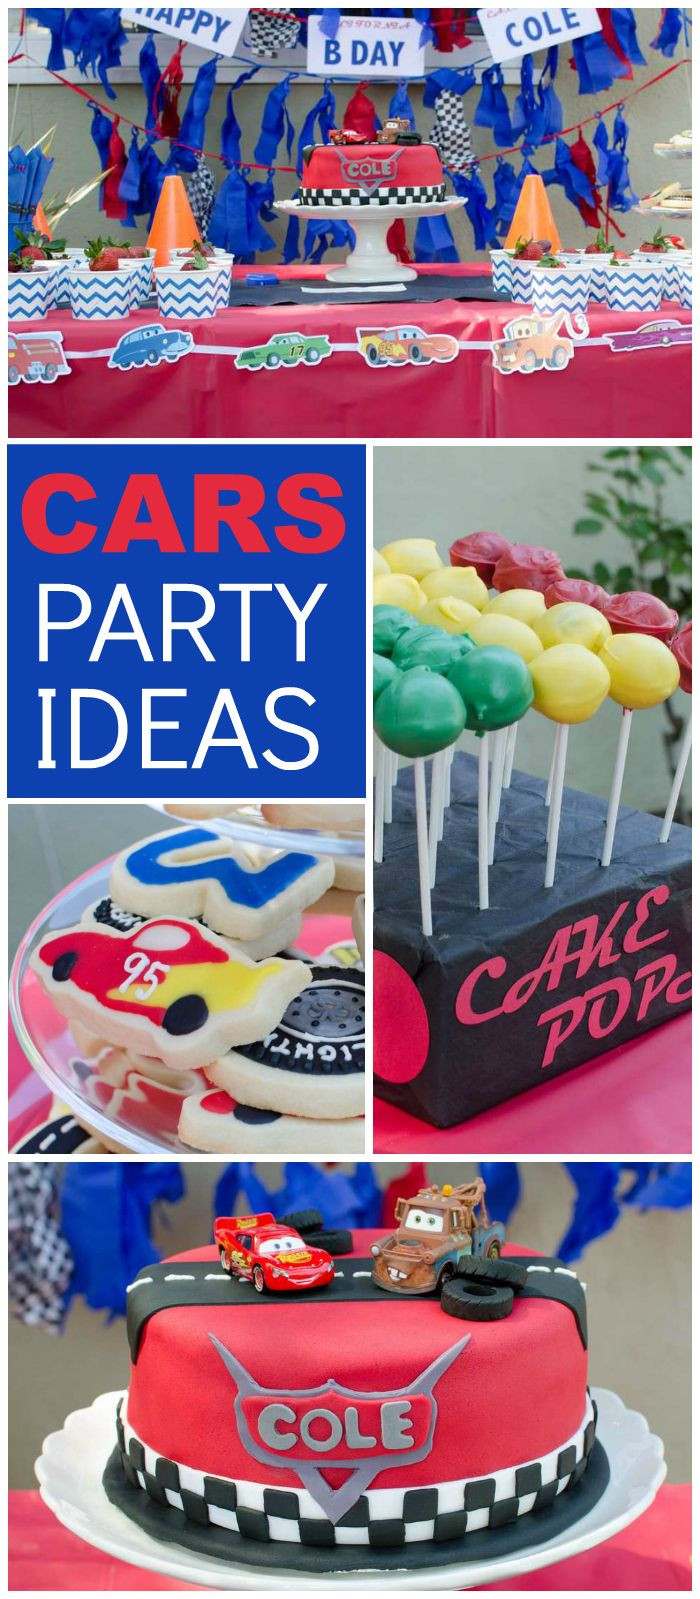 3 Year Old Boys Birthday Party Ideas
 A 3 year old birthday party all about Lightning McQueen